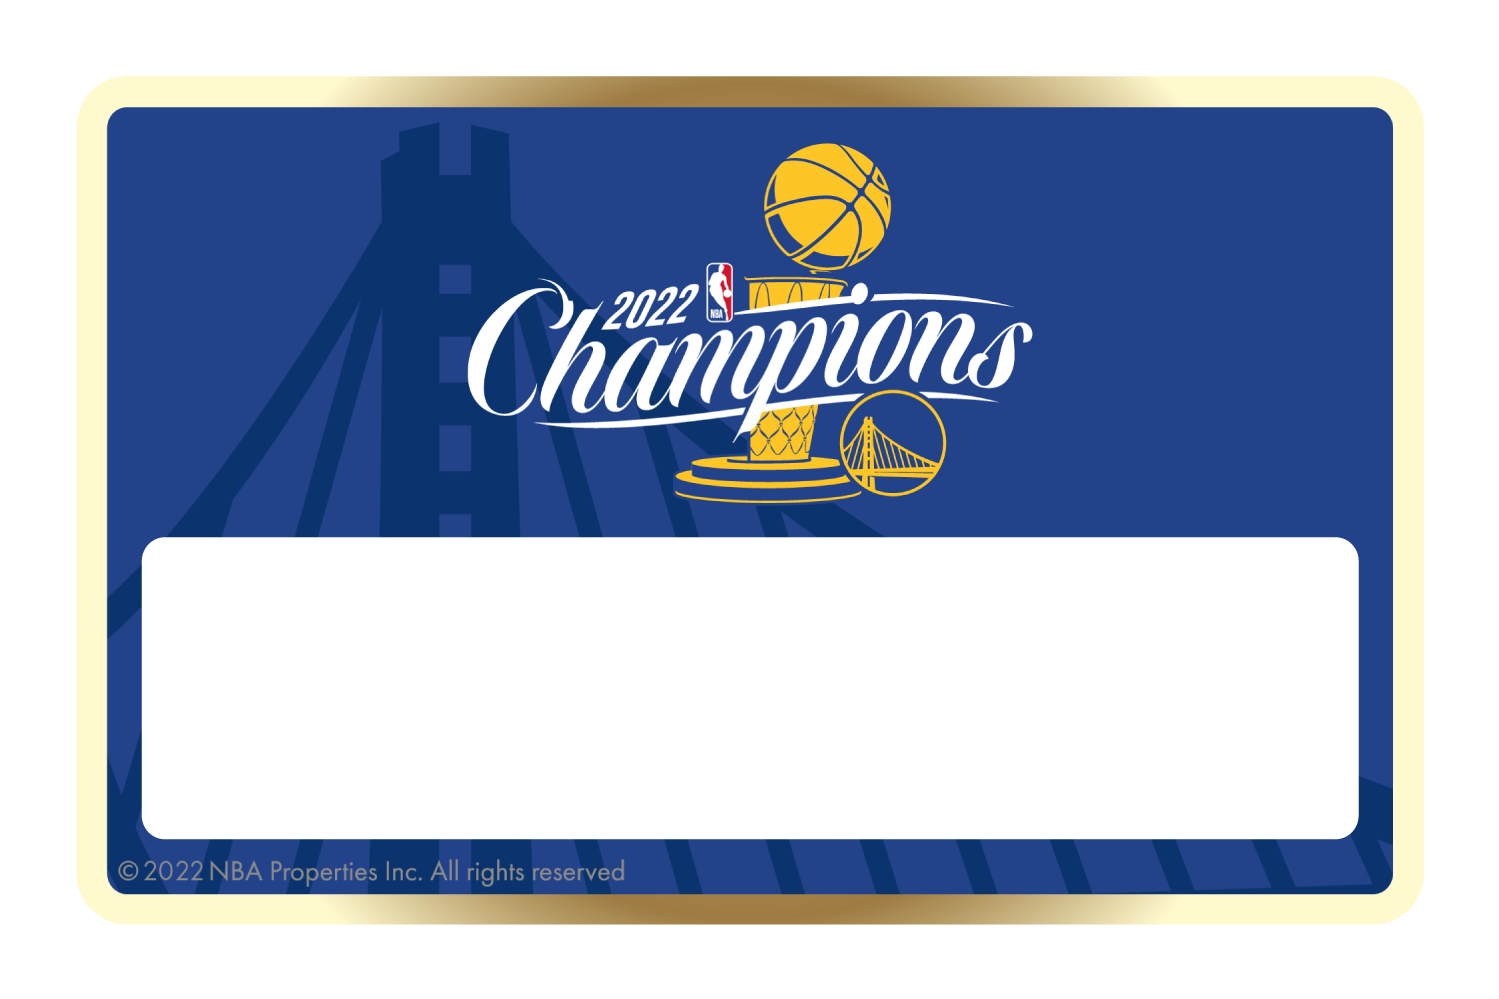 Credit Debit Card Skins | Cucu Covers - Customize Any Bank Card - 2022 NBA Champions: Golden State Warriors - Gold Ring, Half Cover / Small Chip